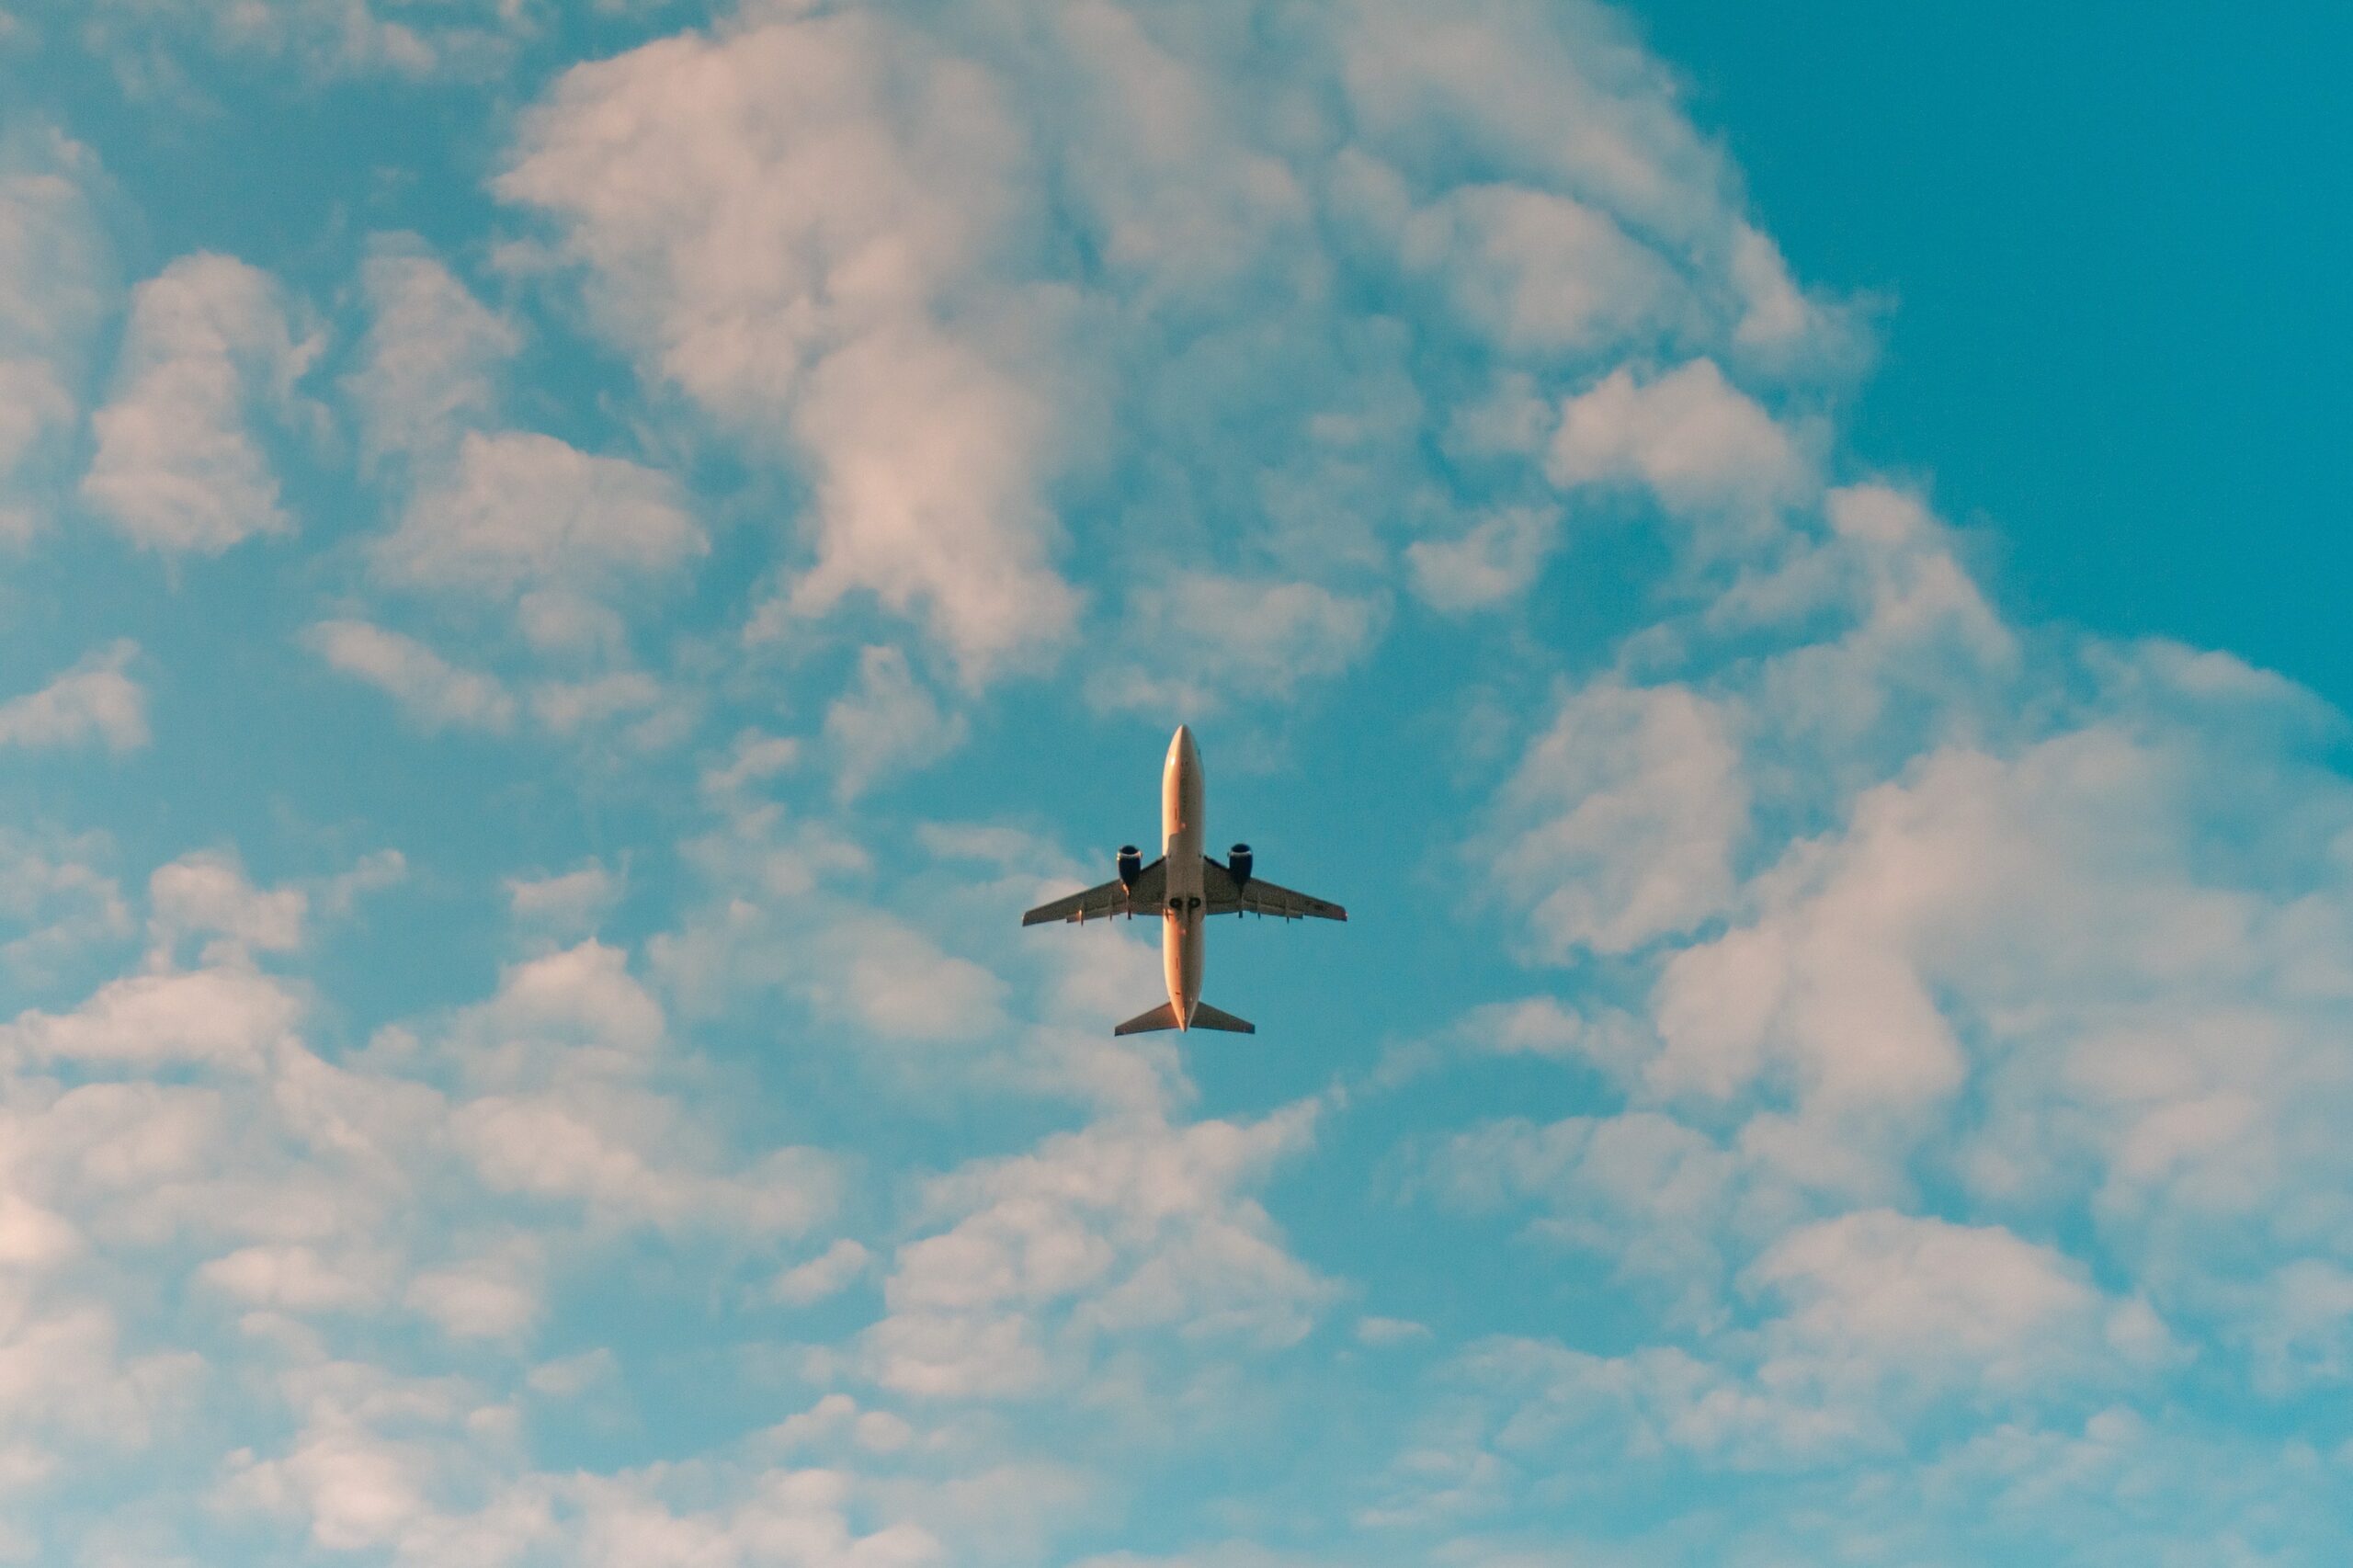 We offer a range of comprehensive and competitively-priced Gap Year Travel Insurance policies that can be tailored to meet your Gap Year travel plans.